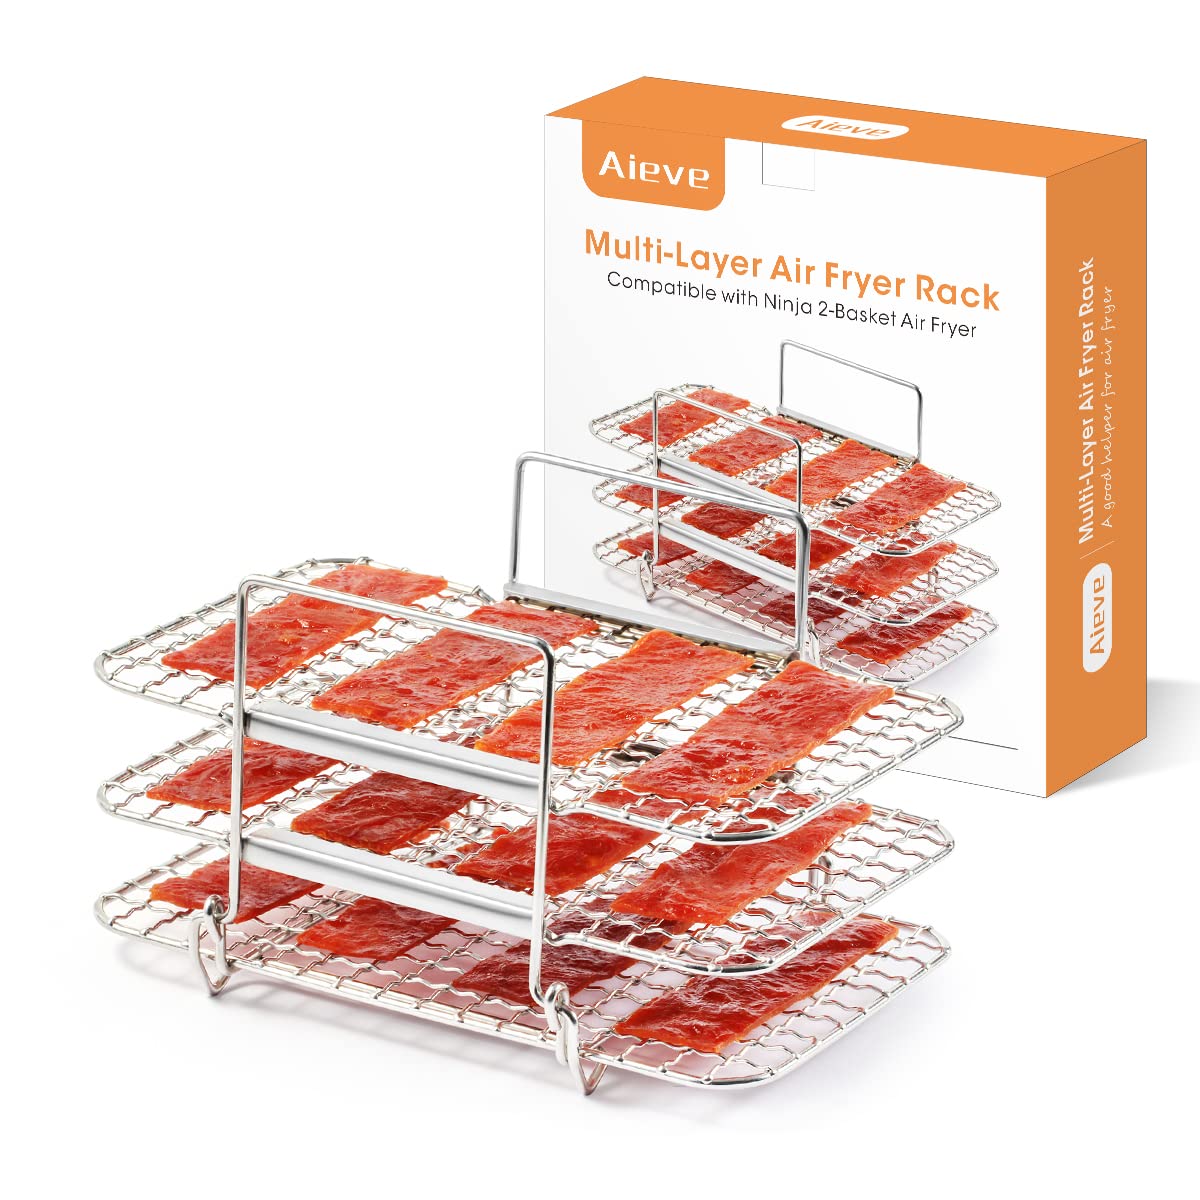 Aieve Multi-Layer Air Rack Compatible with Ninja 2-Basket Air Fryer.